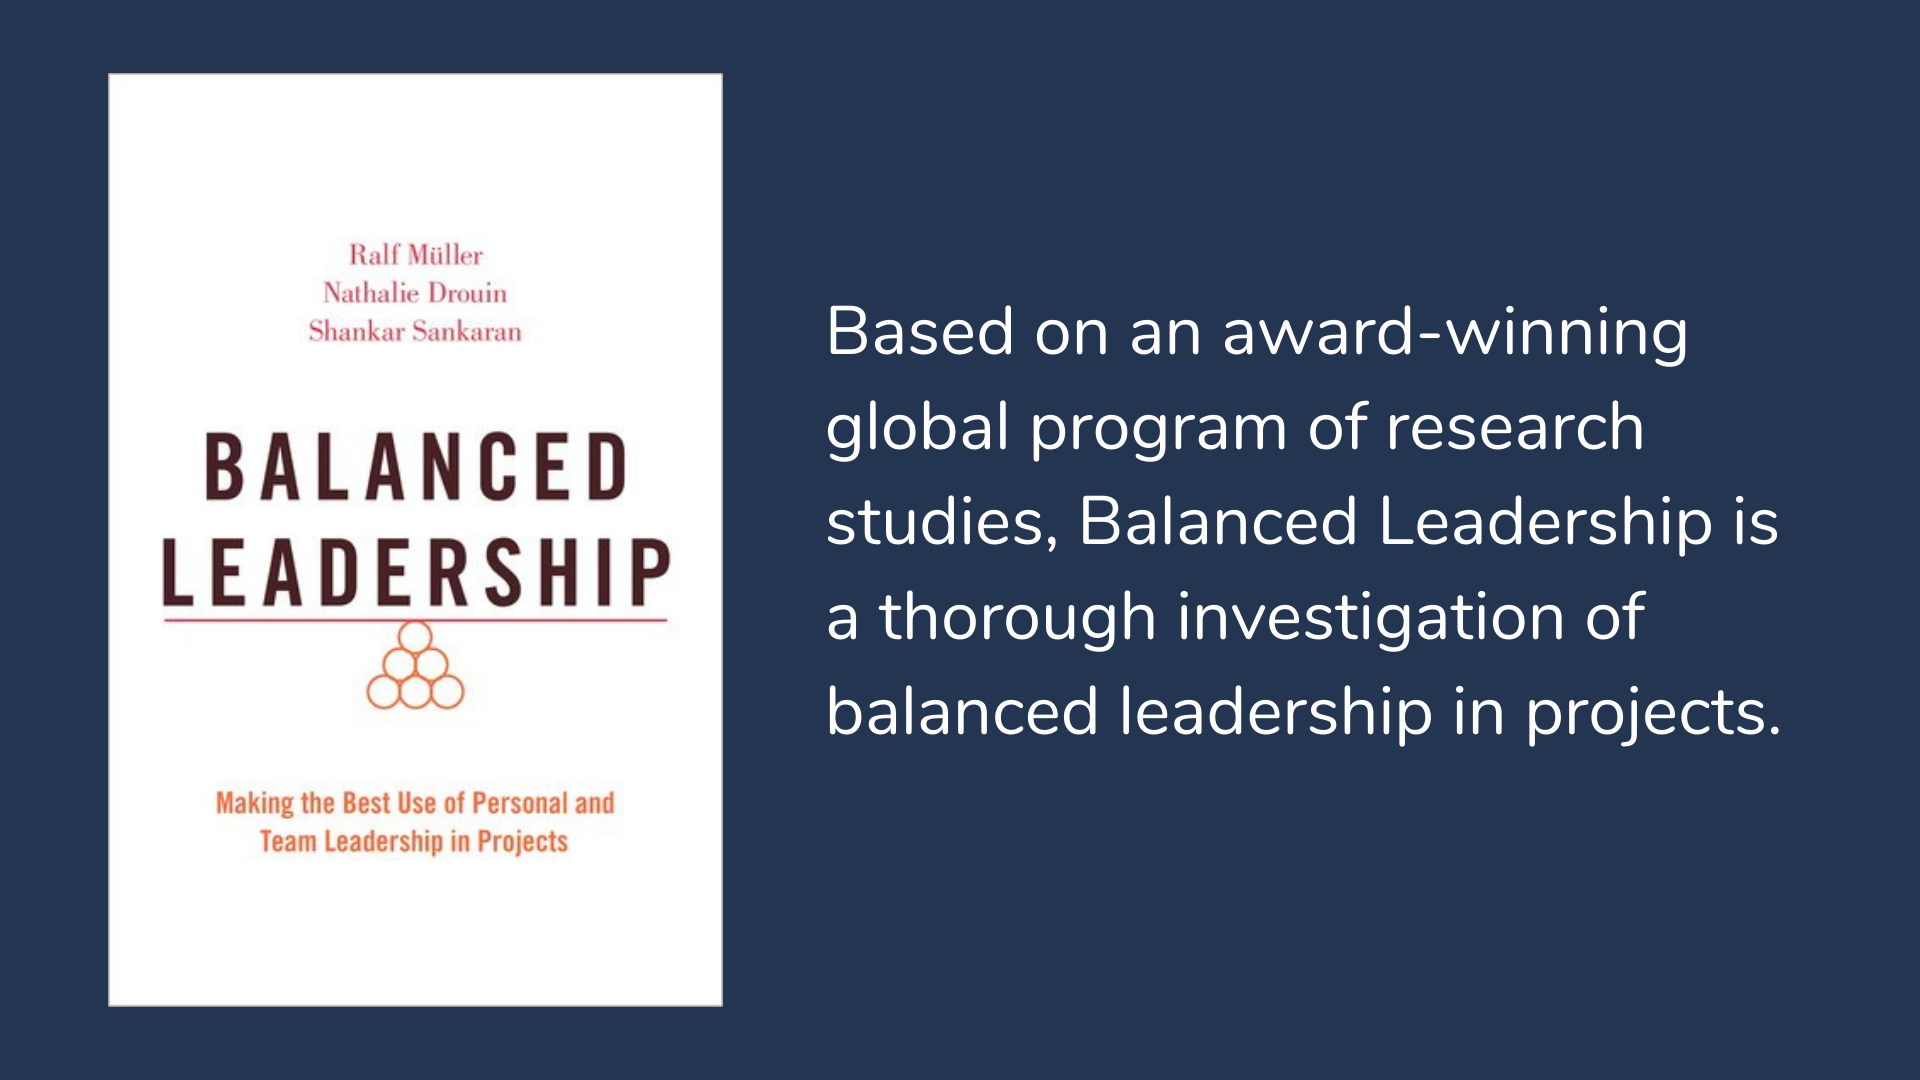 Balanced Leadership: Making the Best Use of Personal and Team Leadership in Projects. Book cover and description.